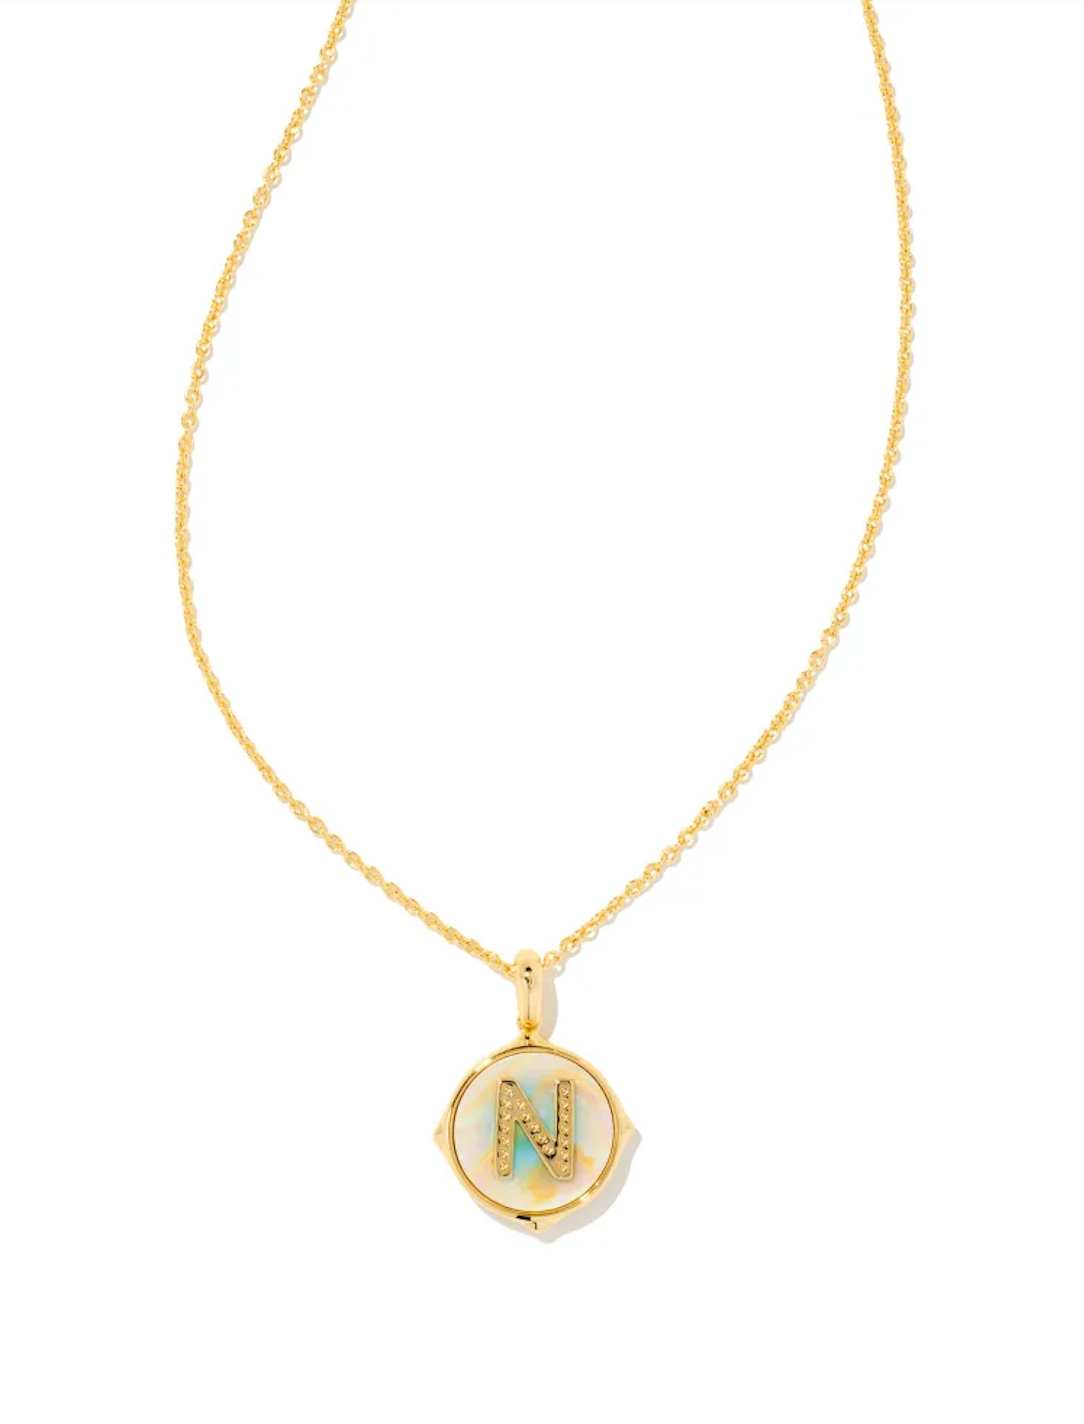 KENDRA SCOTT LETTER N DISC PENDENT NECKLACE GOLD IRIDESCENT ABALONE